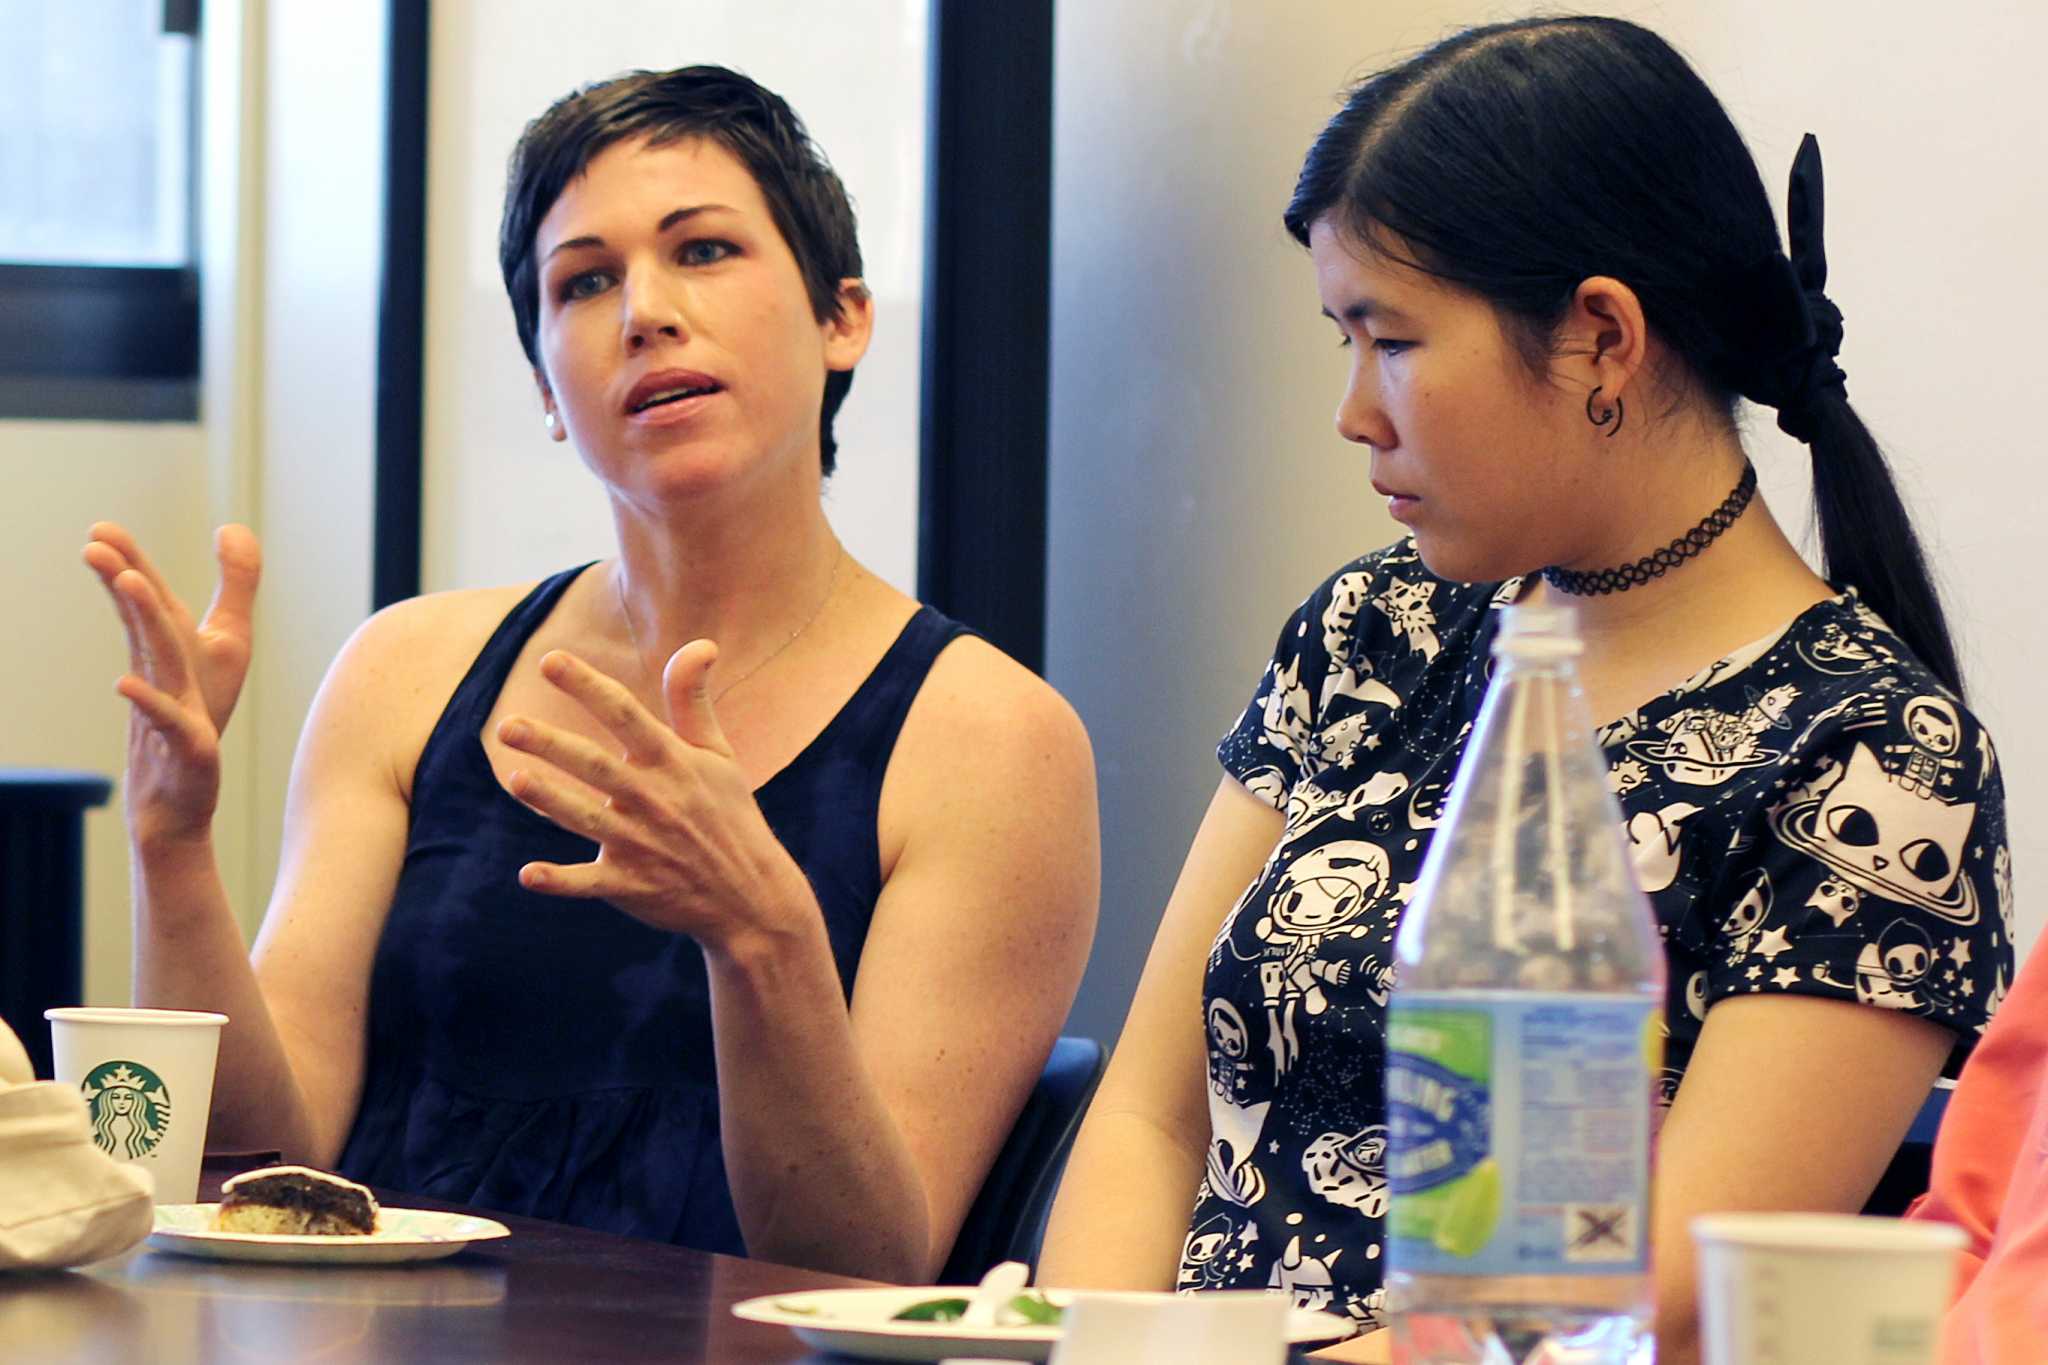 Astrophysics majors Wendy Crumrine (left) and Audrey Dijeau (right) engage in a discussion about their love for physics with award-winning planetary scientist Dr. Carolyn Porco during their Women in Physics and Astronomy club meeting in Thornton Hall 434 at SF State on Monday, April 18, 2016. (George Morin / Xpress)